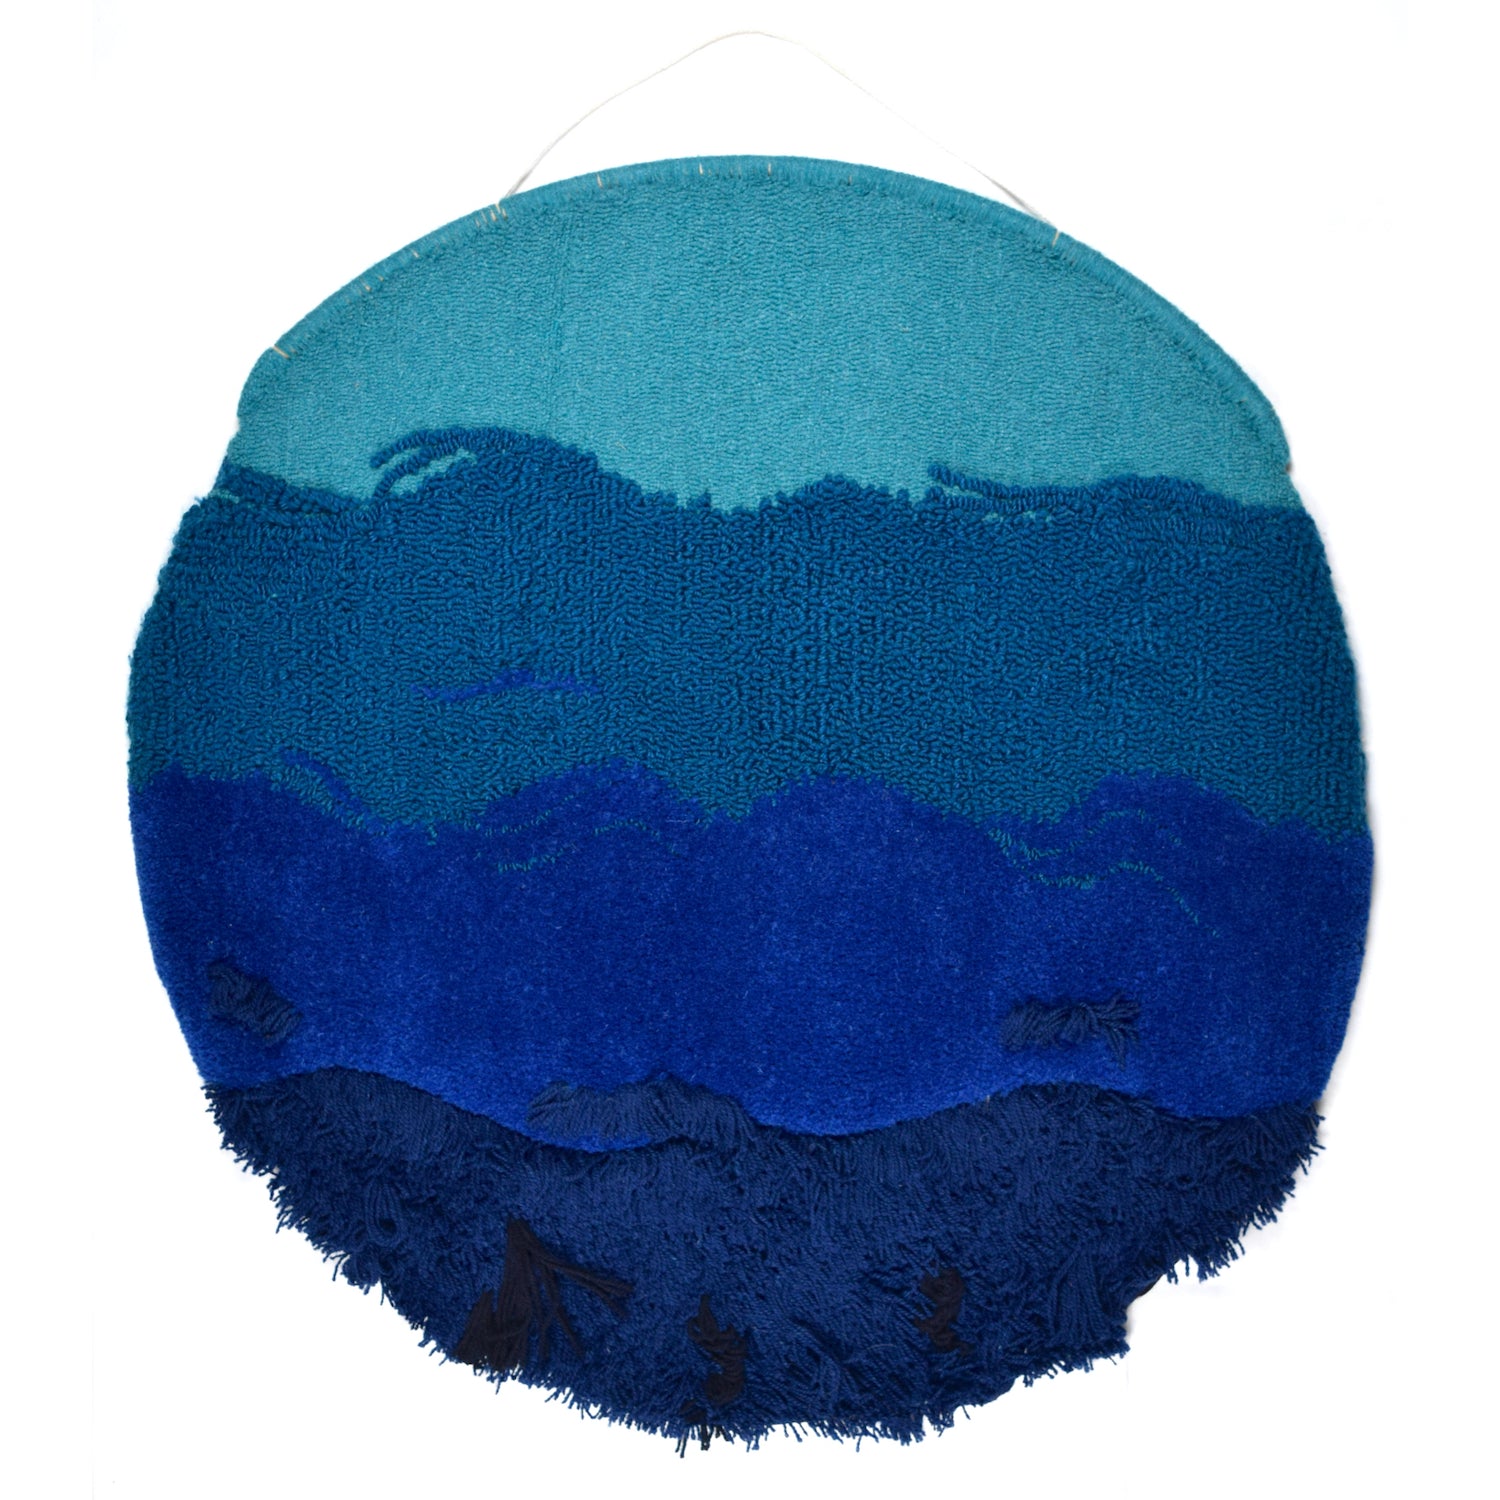 A circular Wall Hanging, ranging from a light turquoise loop pile, blending in to a darker turquoise loop, then royal blue cut pile and navy blue latch hook with additional black finger knitted and crocheted pieces.